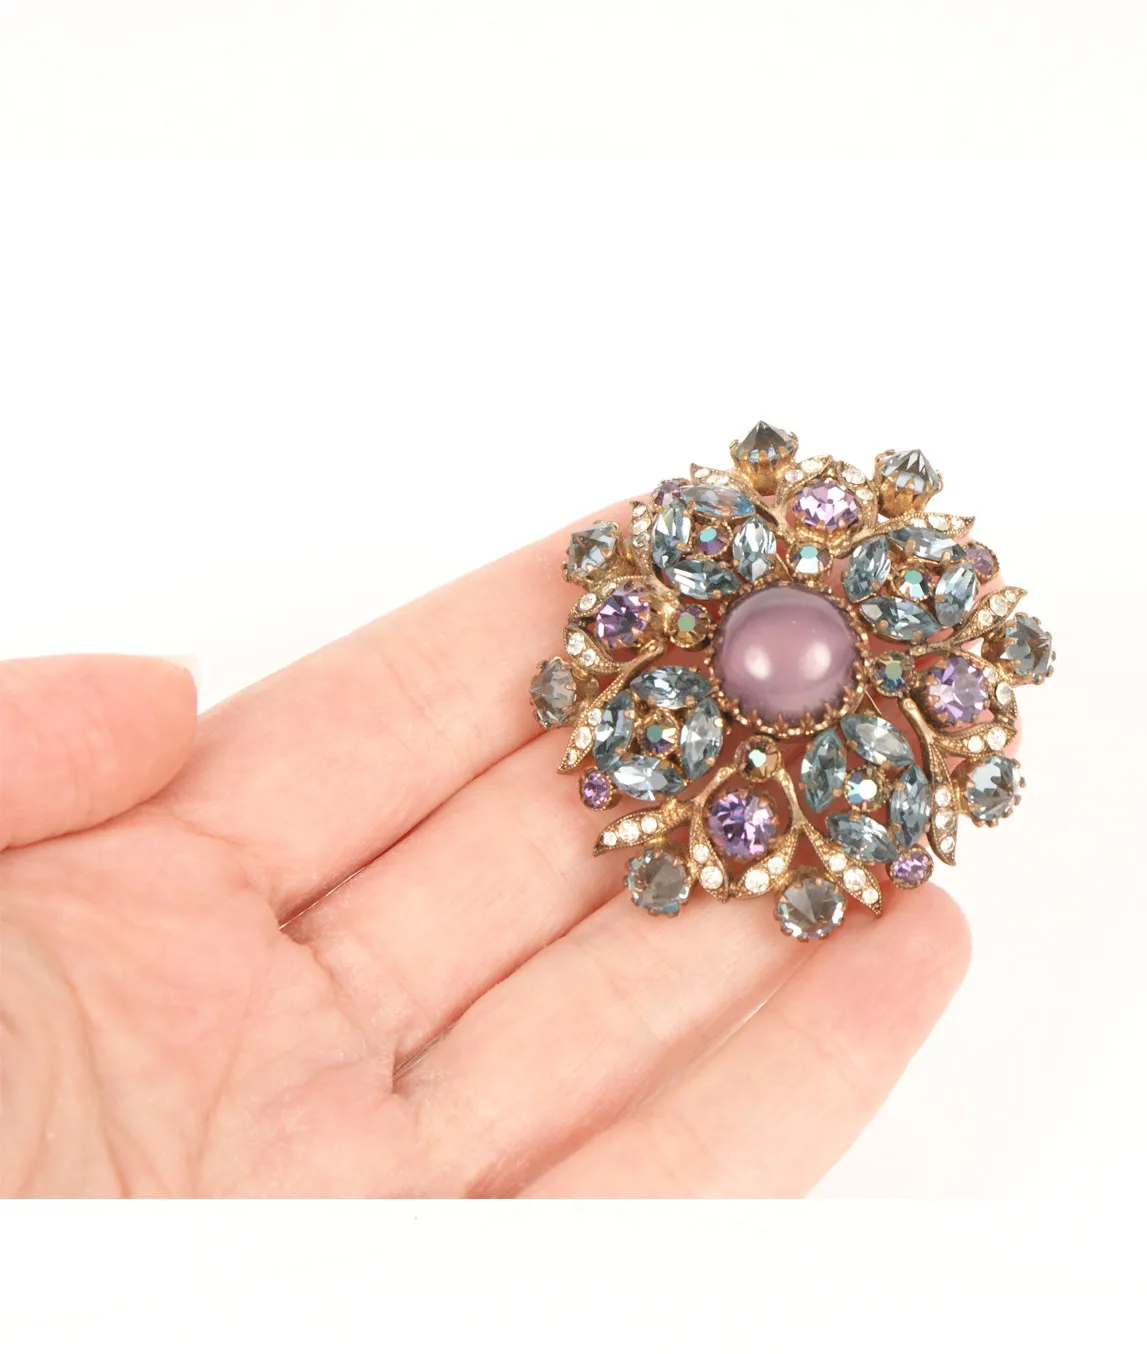 Large vintage crystal brooch in the hand